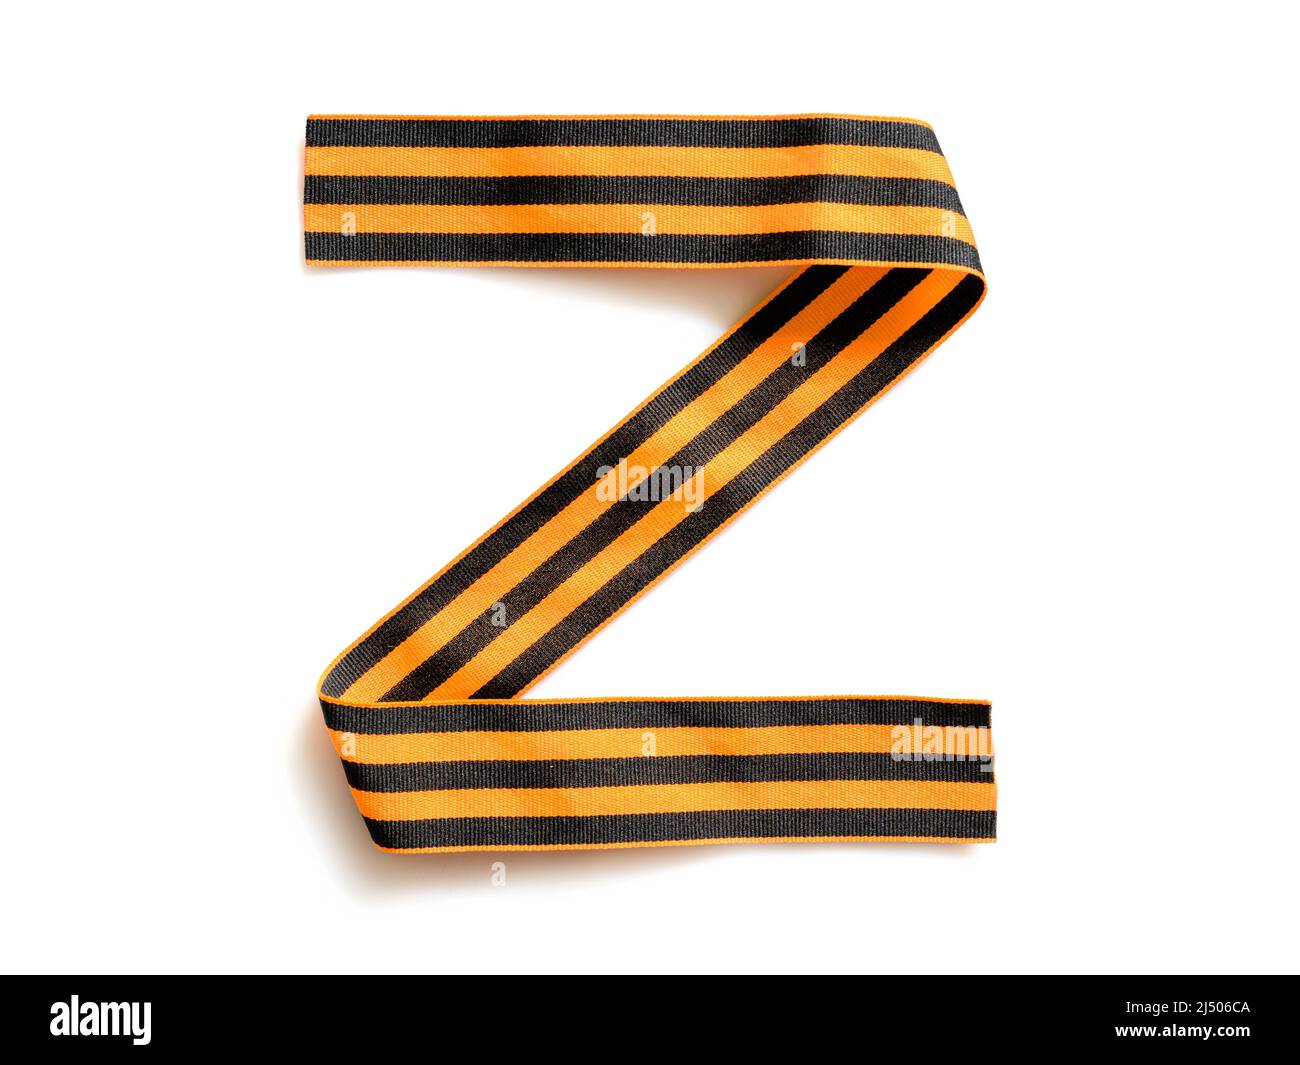 Letter Z made from George striped ribbon isolated on white background, logo Z for Russian army force, military symbol and sign of Russia used in Russi Stock Photo